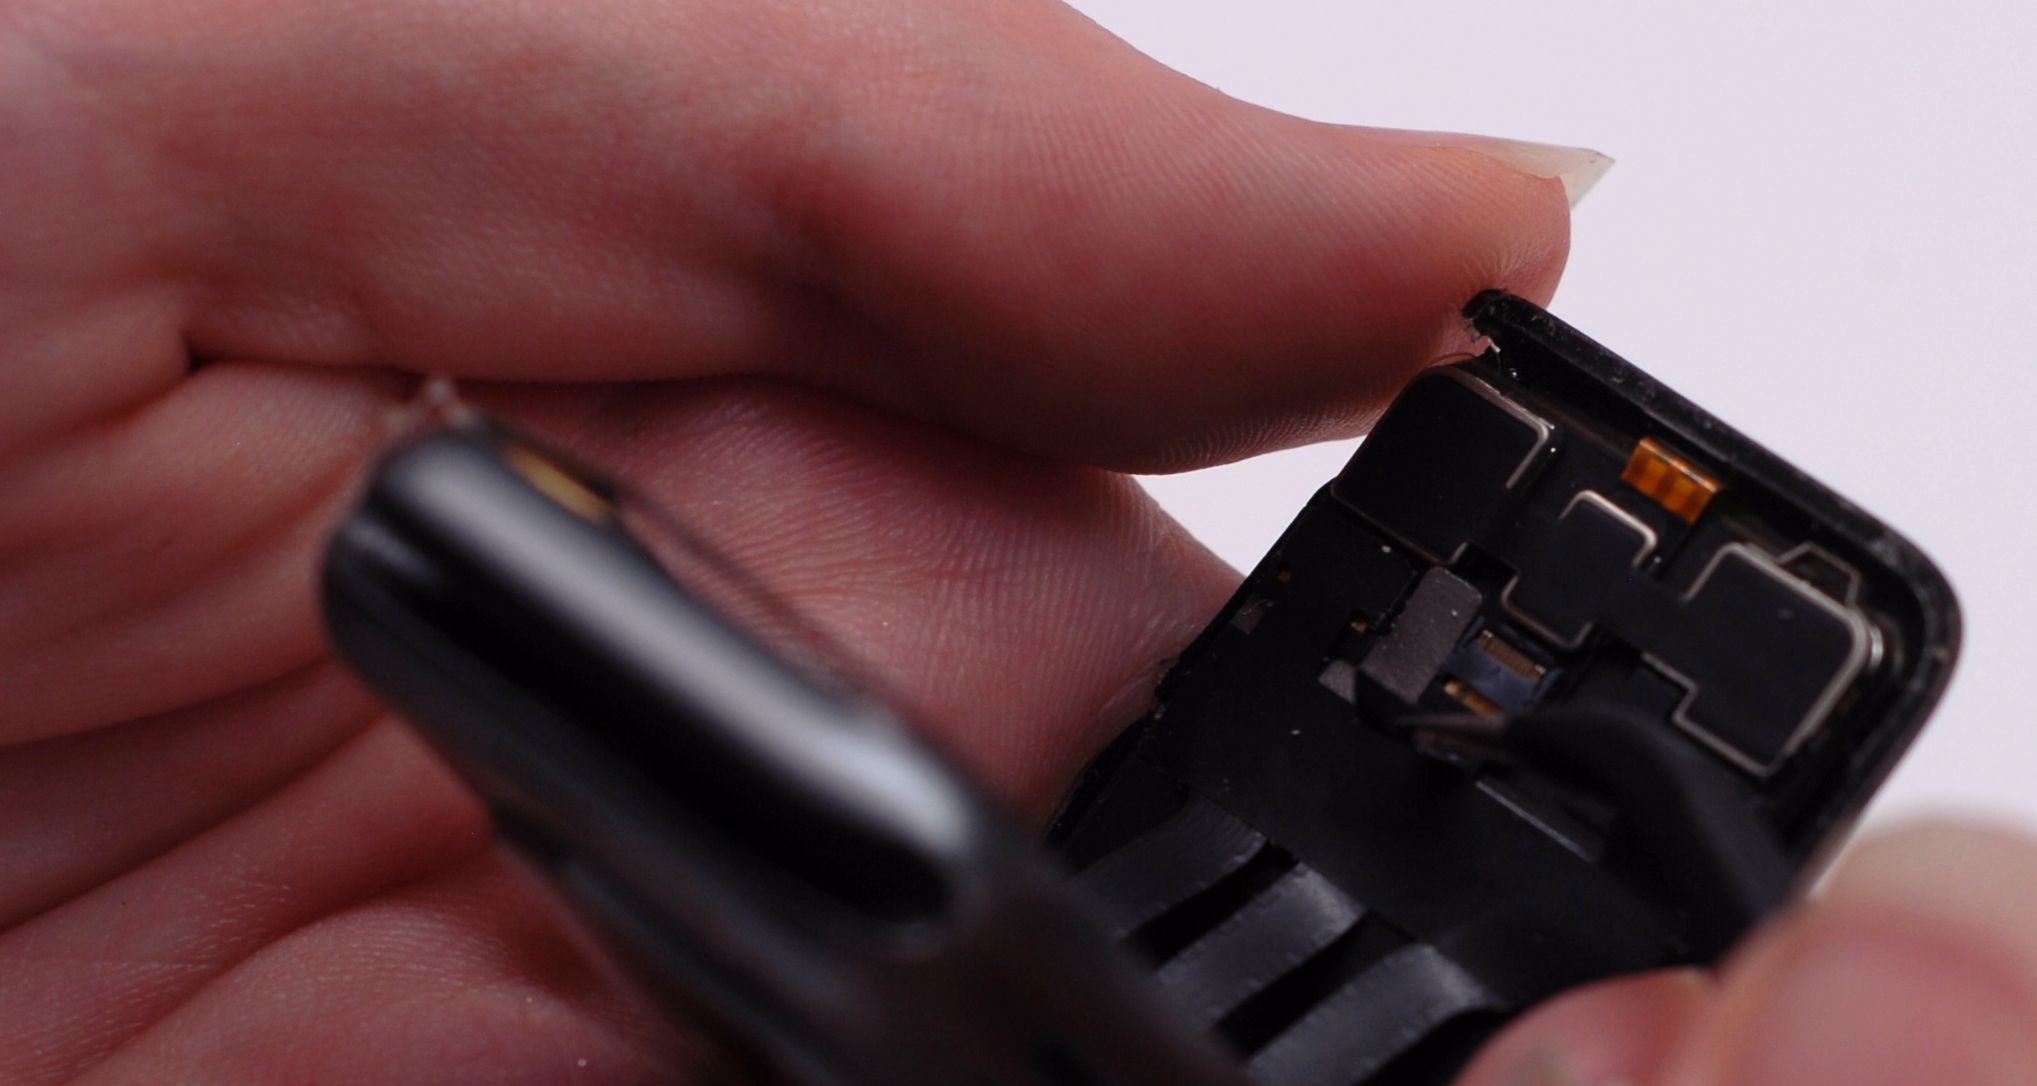 lifting the apple watch screen and revealing the display connectors